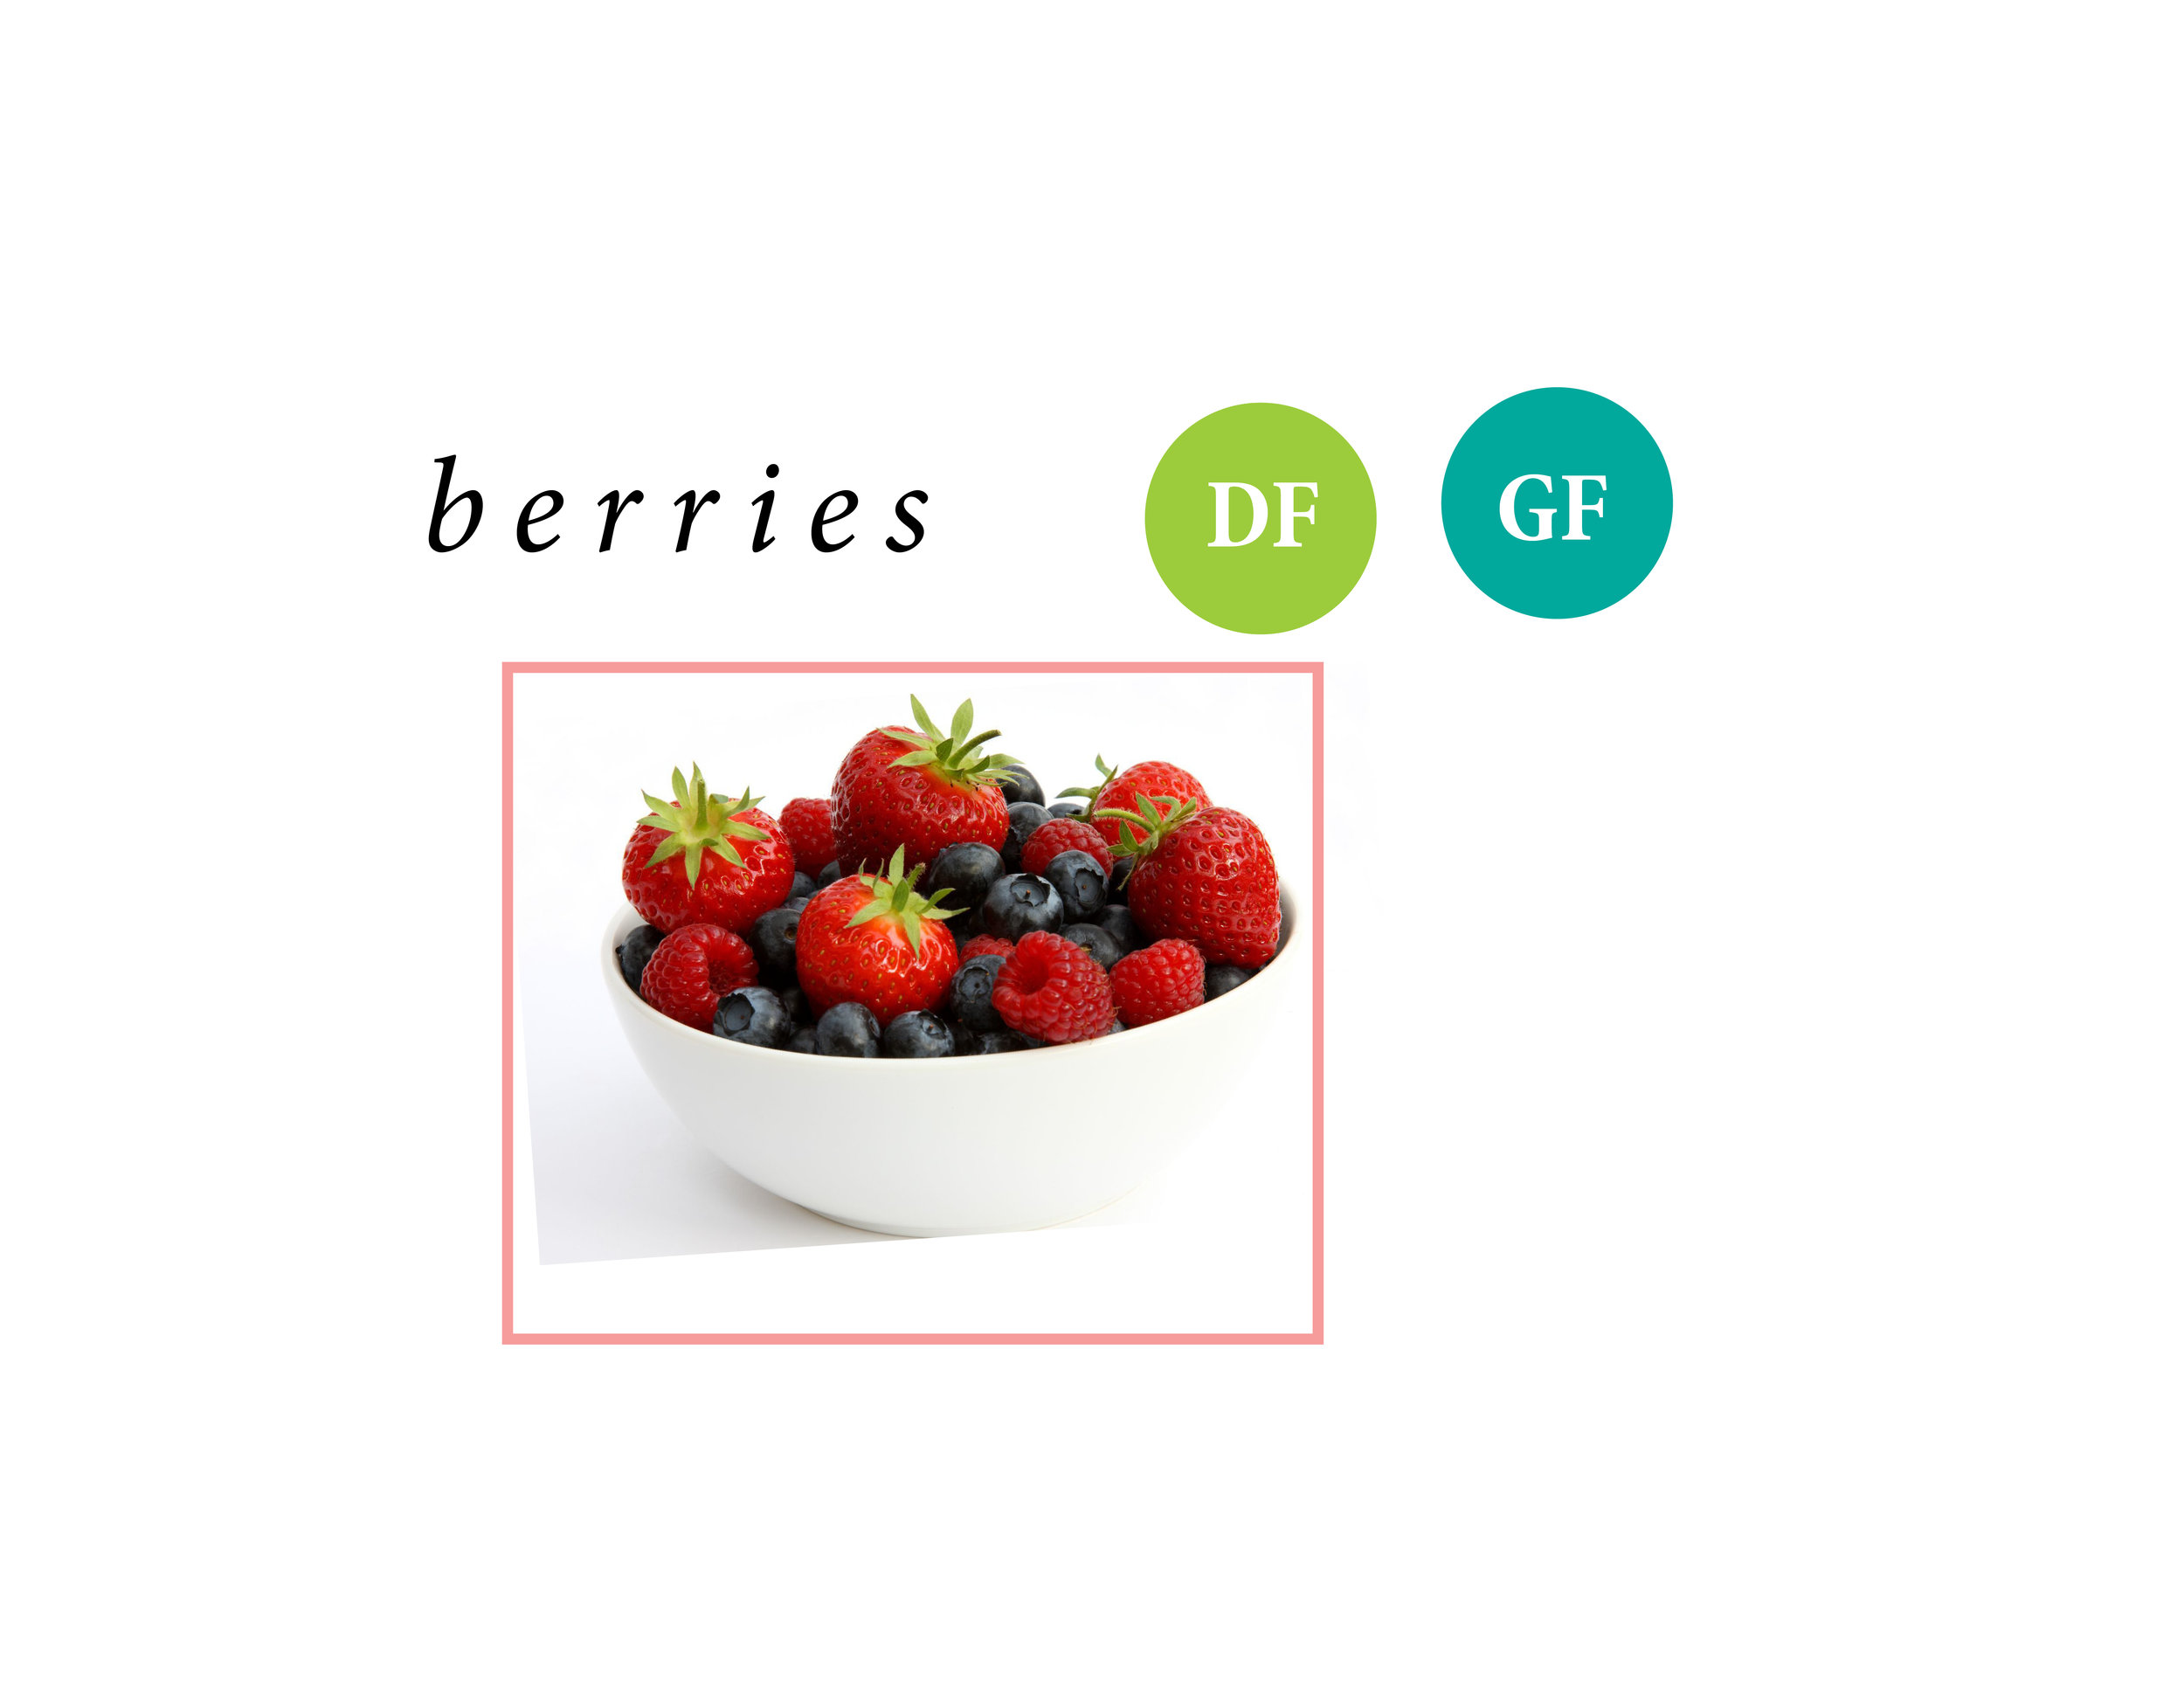  Berries are just always a good idea. I get that sugary sensation that I just have to have something sweet. This is my go to. They're easy to package, take on the go, throw in a smoothie or some granola (like the Purely Elizabeth), or freeze and add 